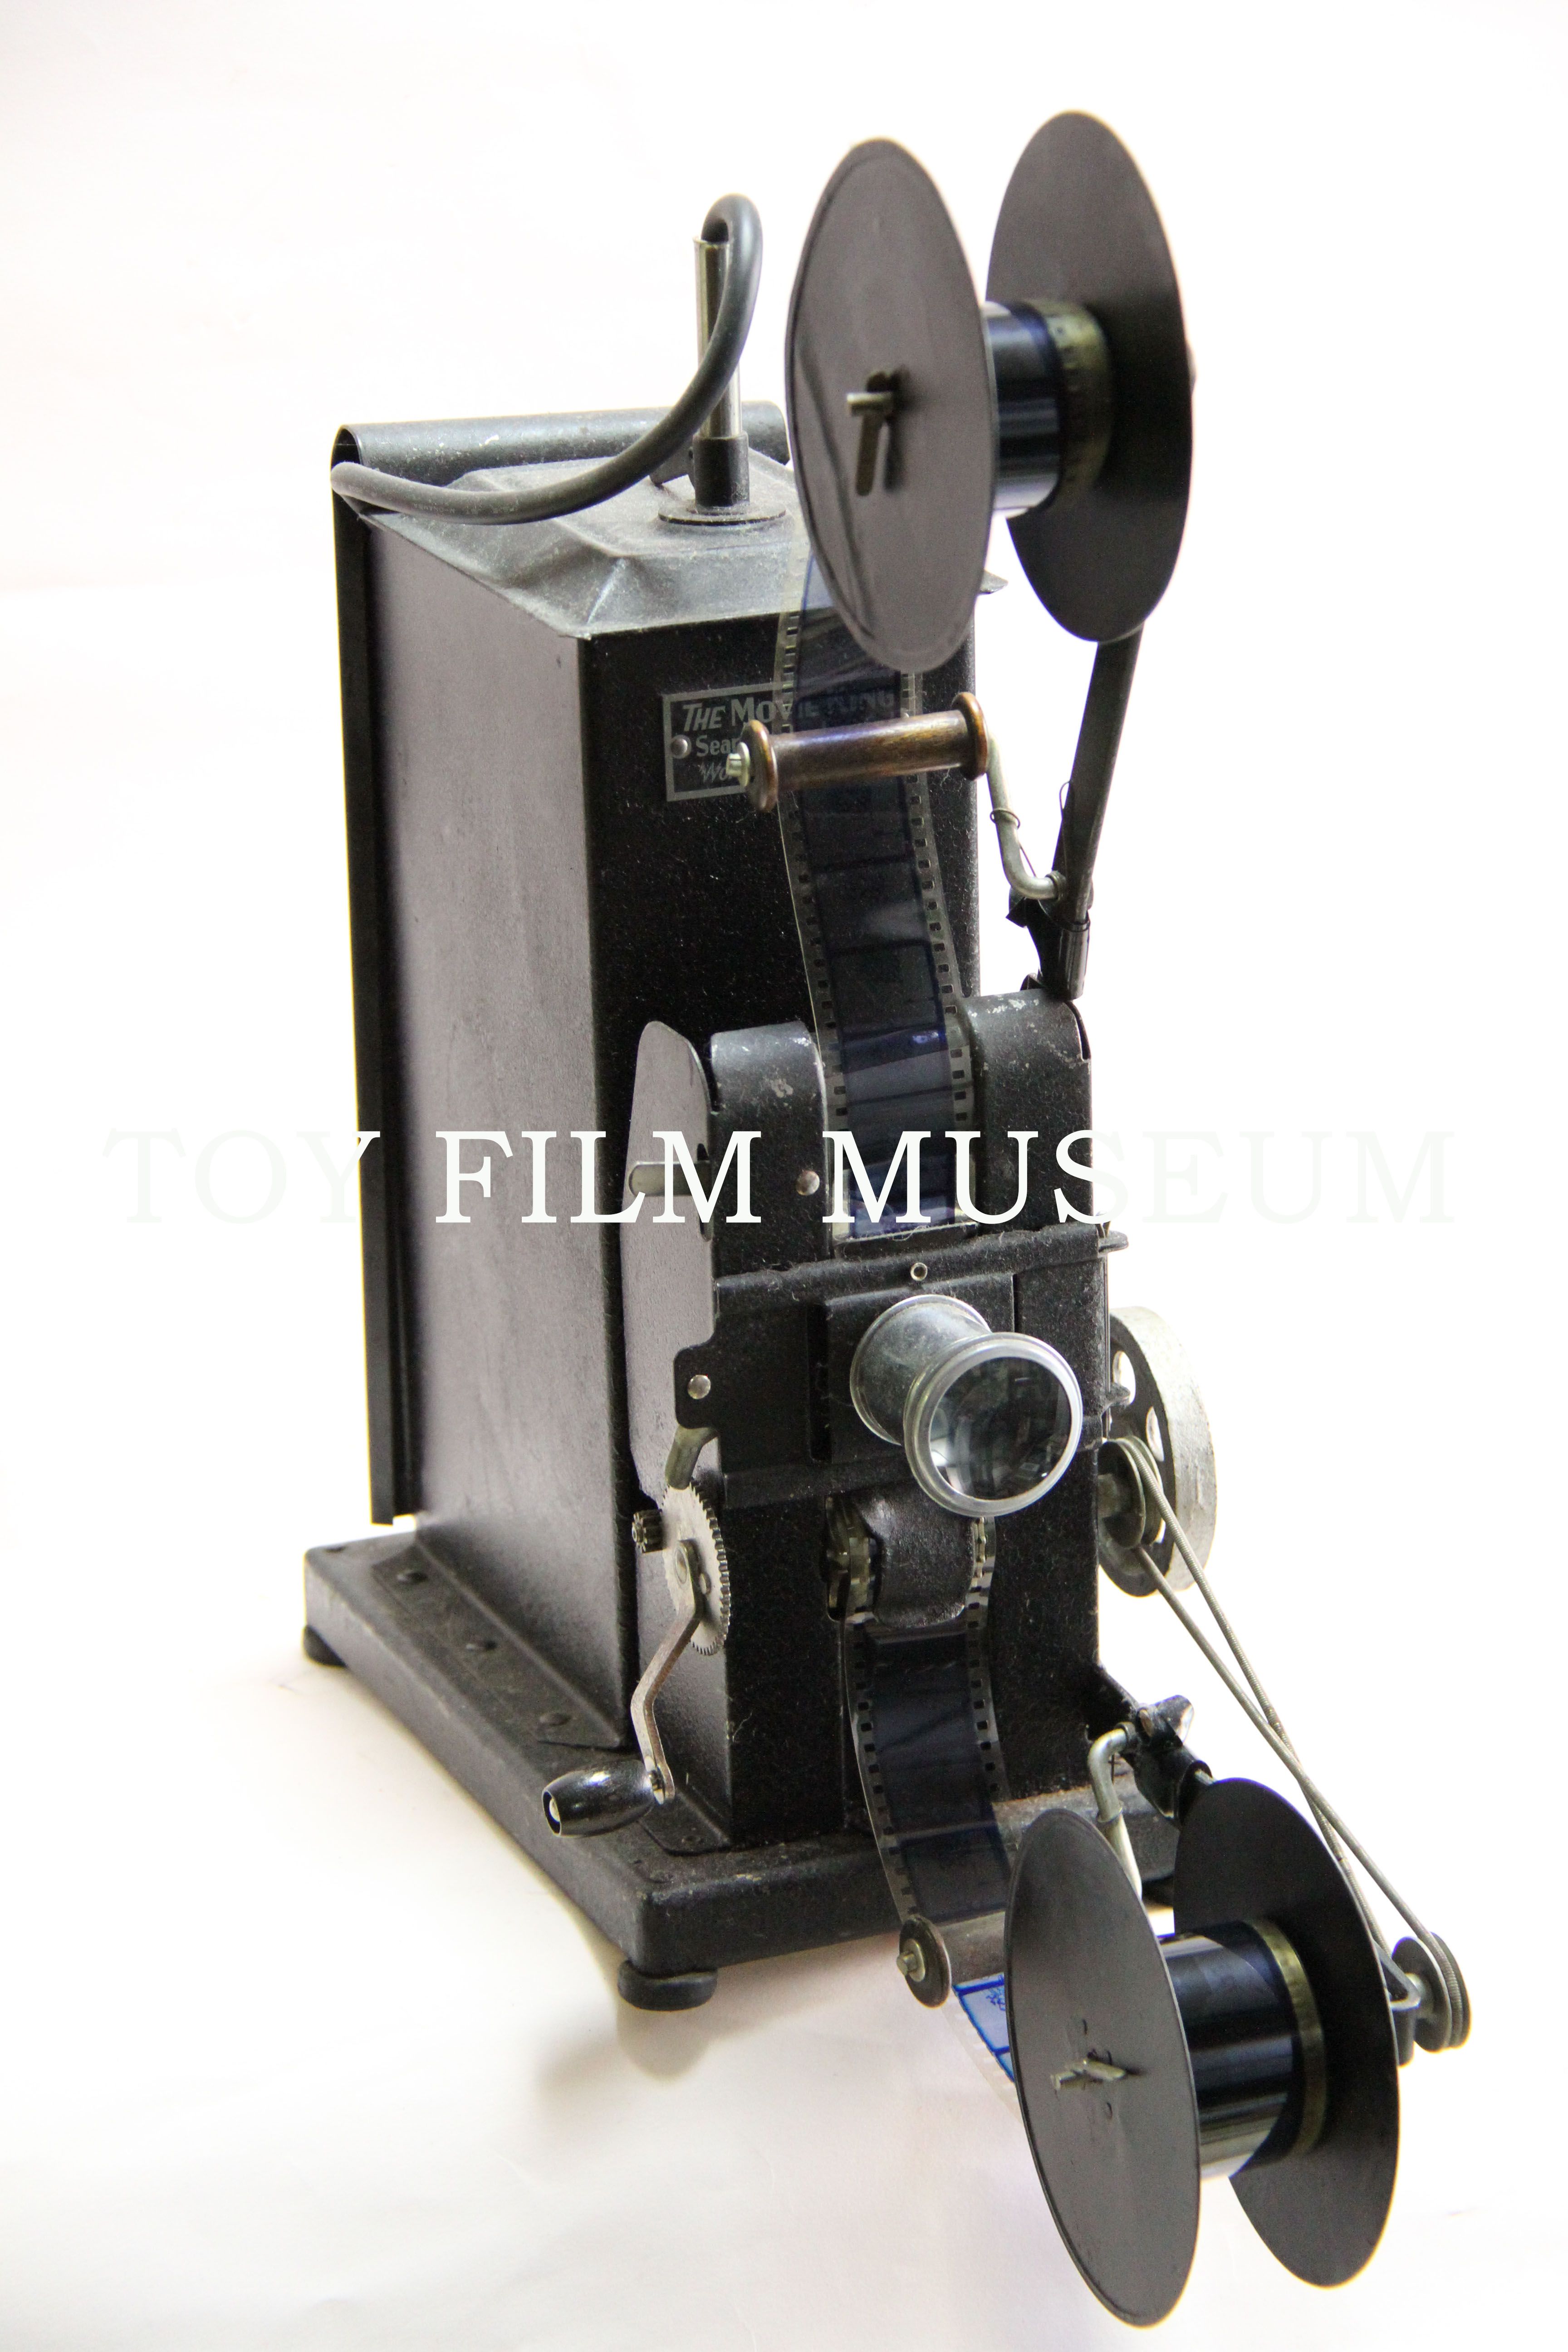 The Movie King 35mm Projector